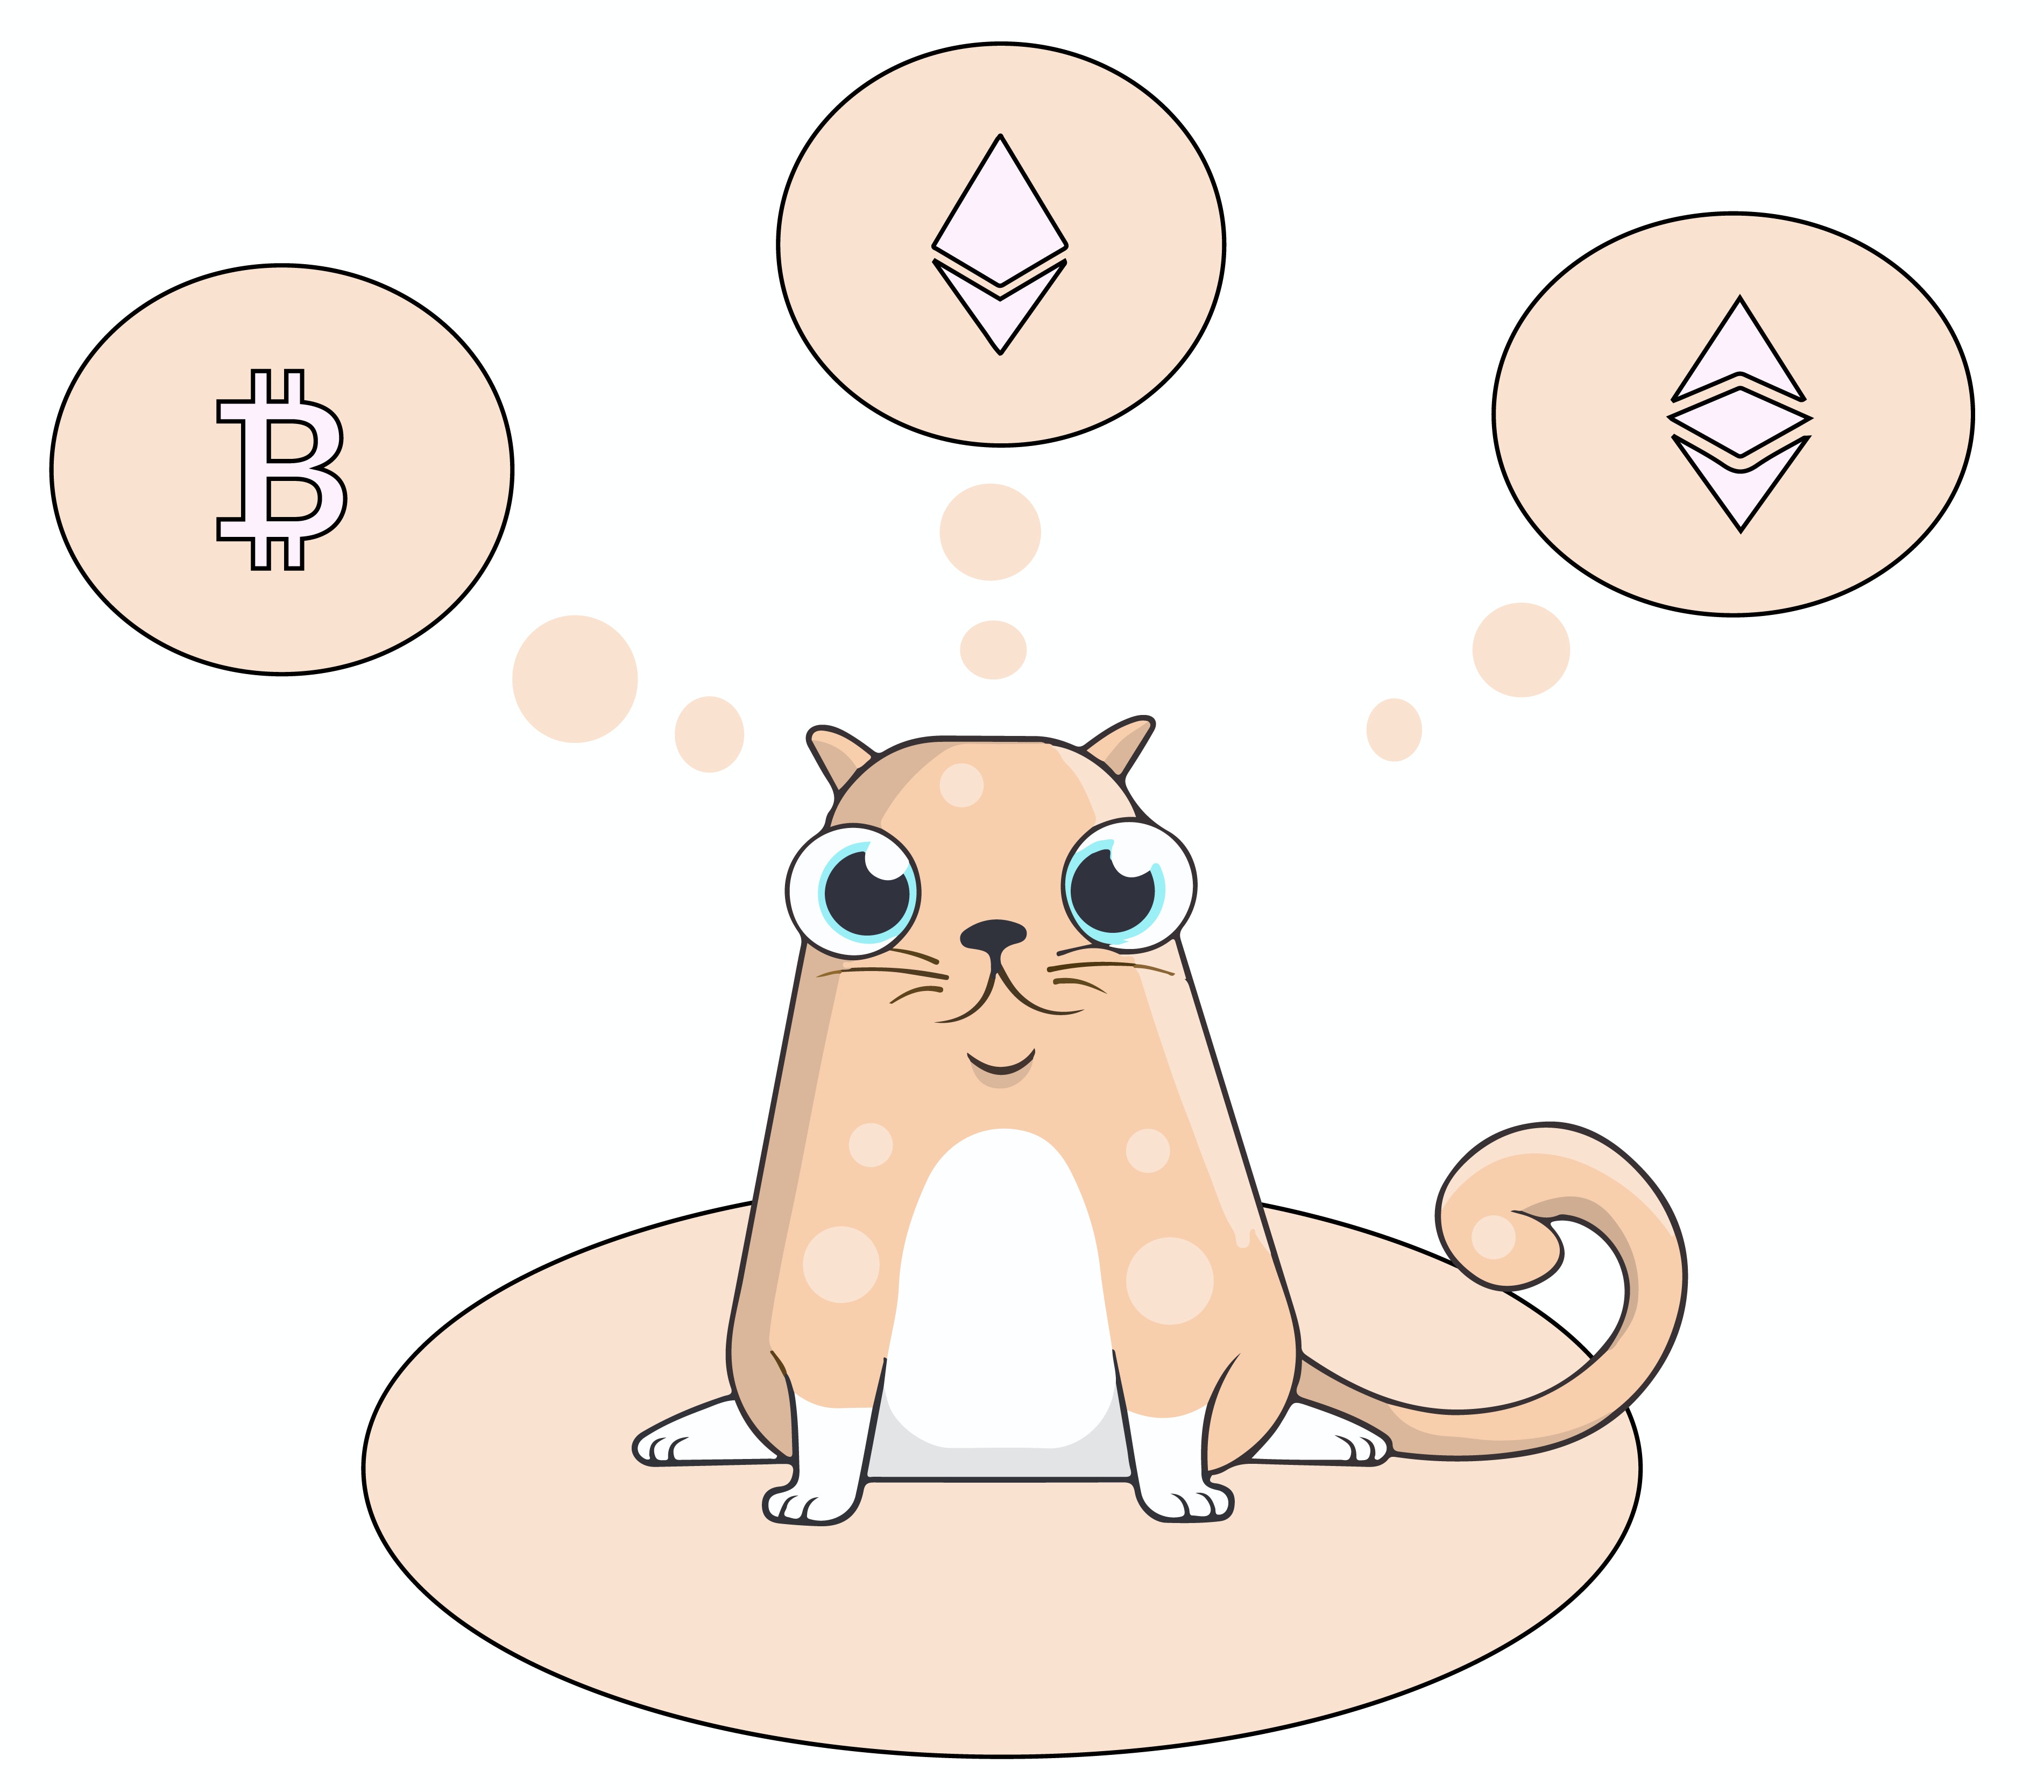 A picture of a CryptoKitty